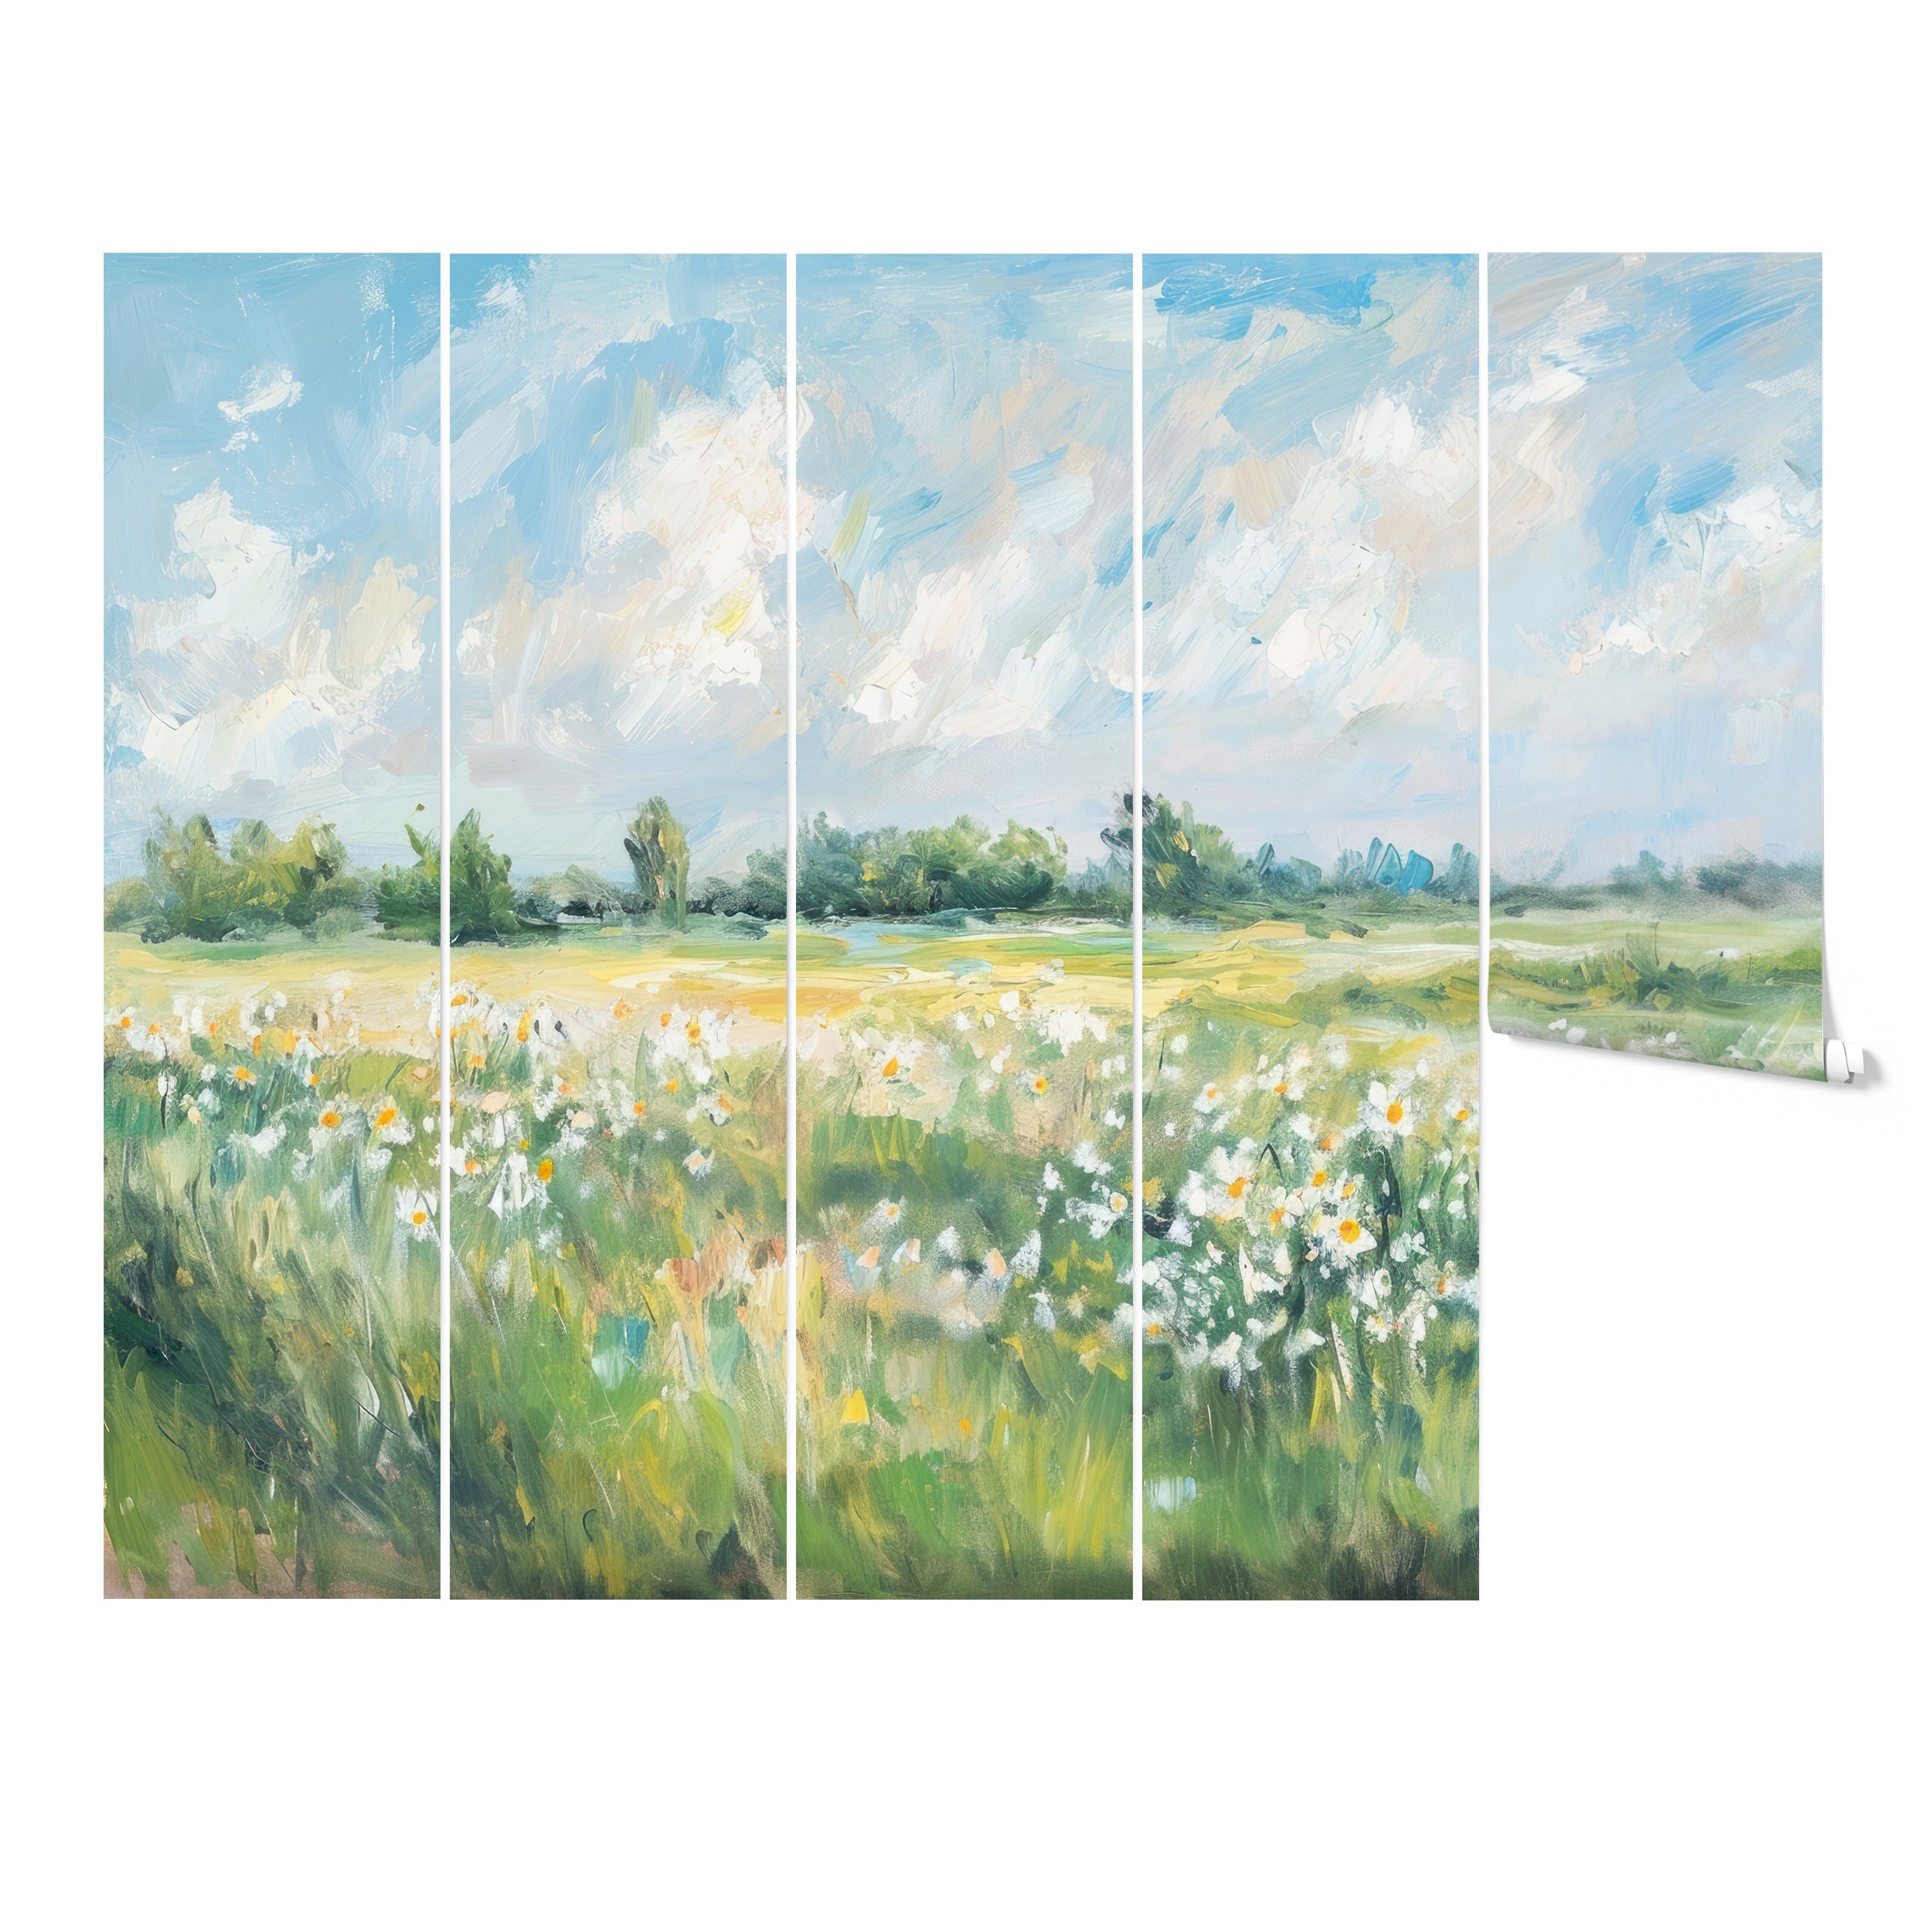 Panoramic view of the Impressionist mural wallpaper in five panels, showcasing a peaceful meadow with daisies and lush greenery, set against a clear blue sky with white clouds."